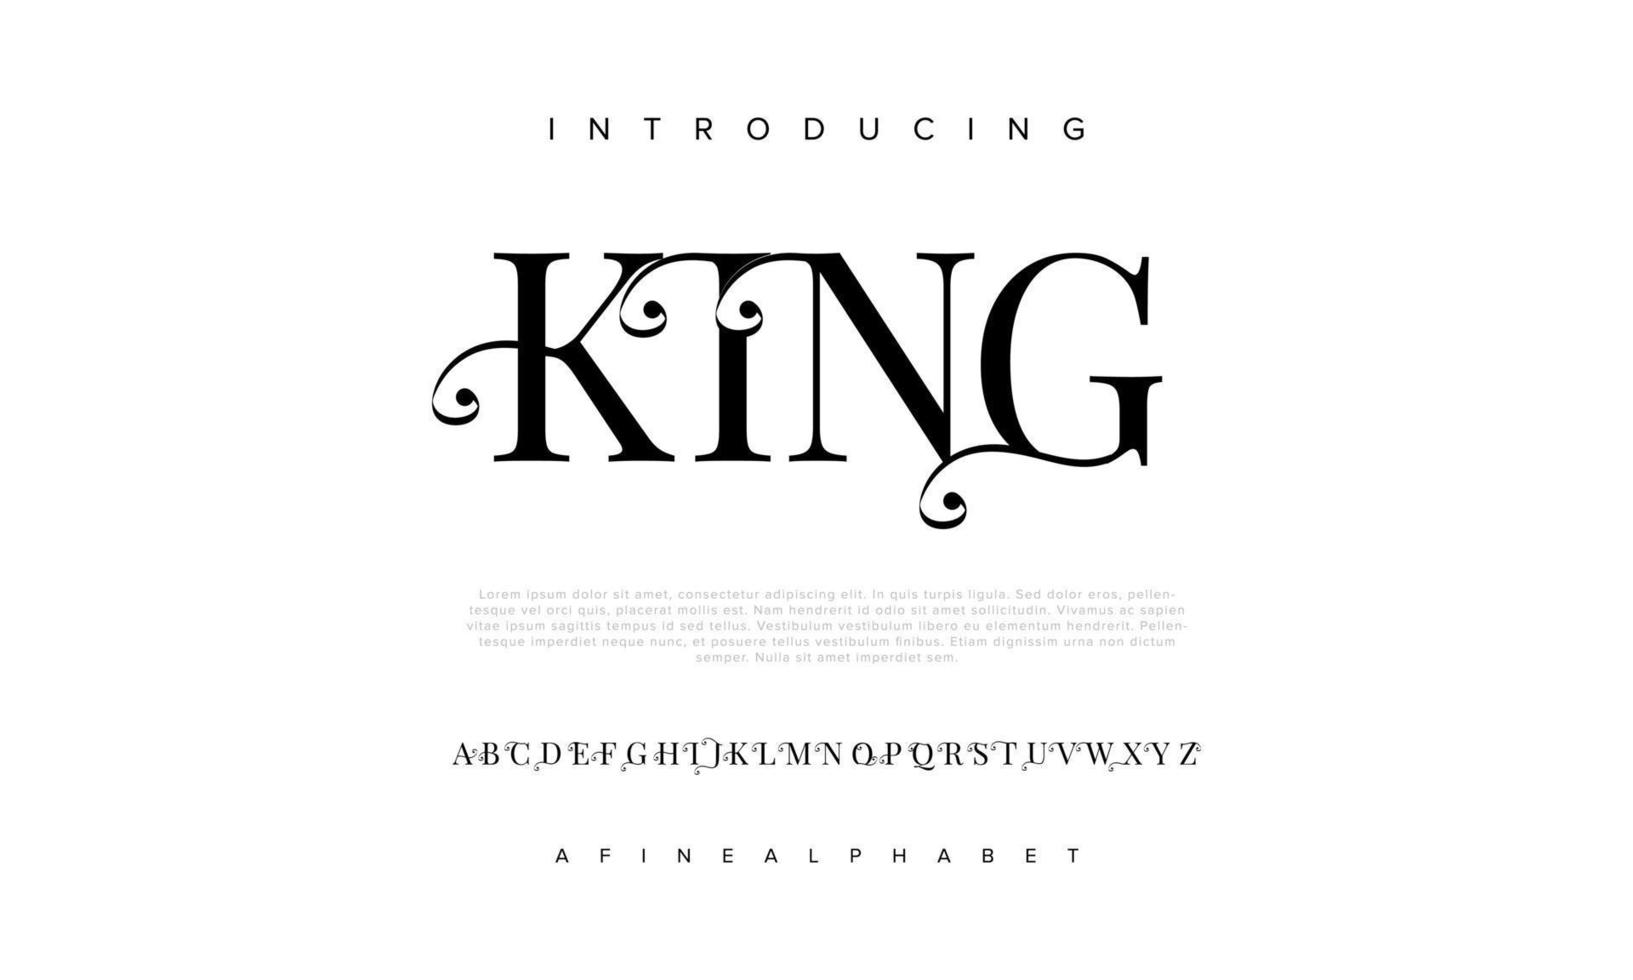 King abstract Fashion font alphabet. Minimal modern urban fonts for logo, brand etc. Typography typeface uppercase lowercase and number. vector illustration